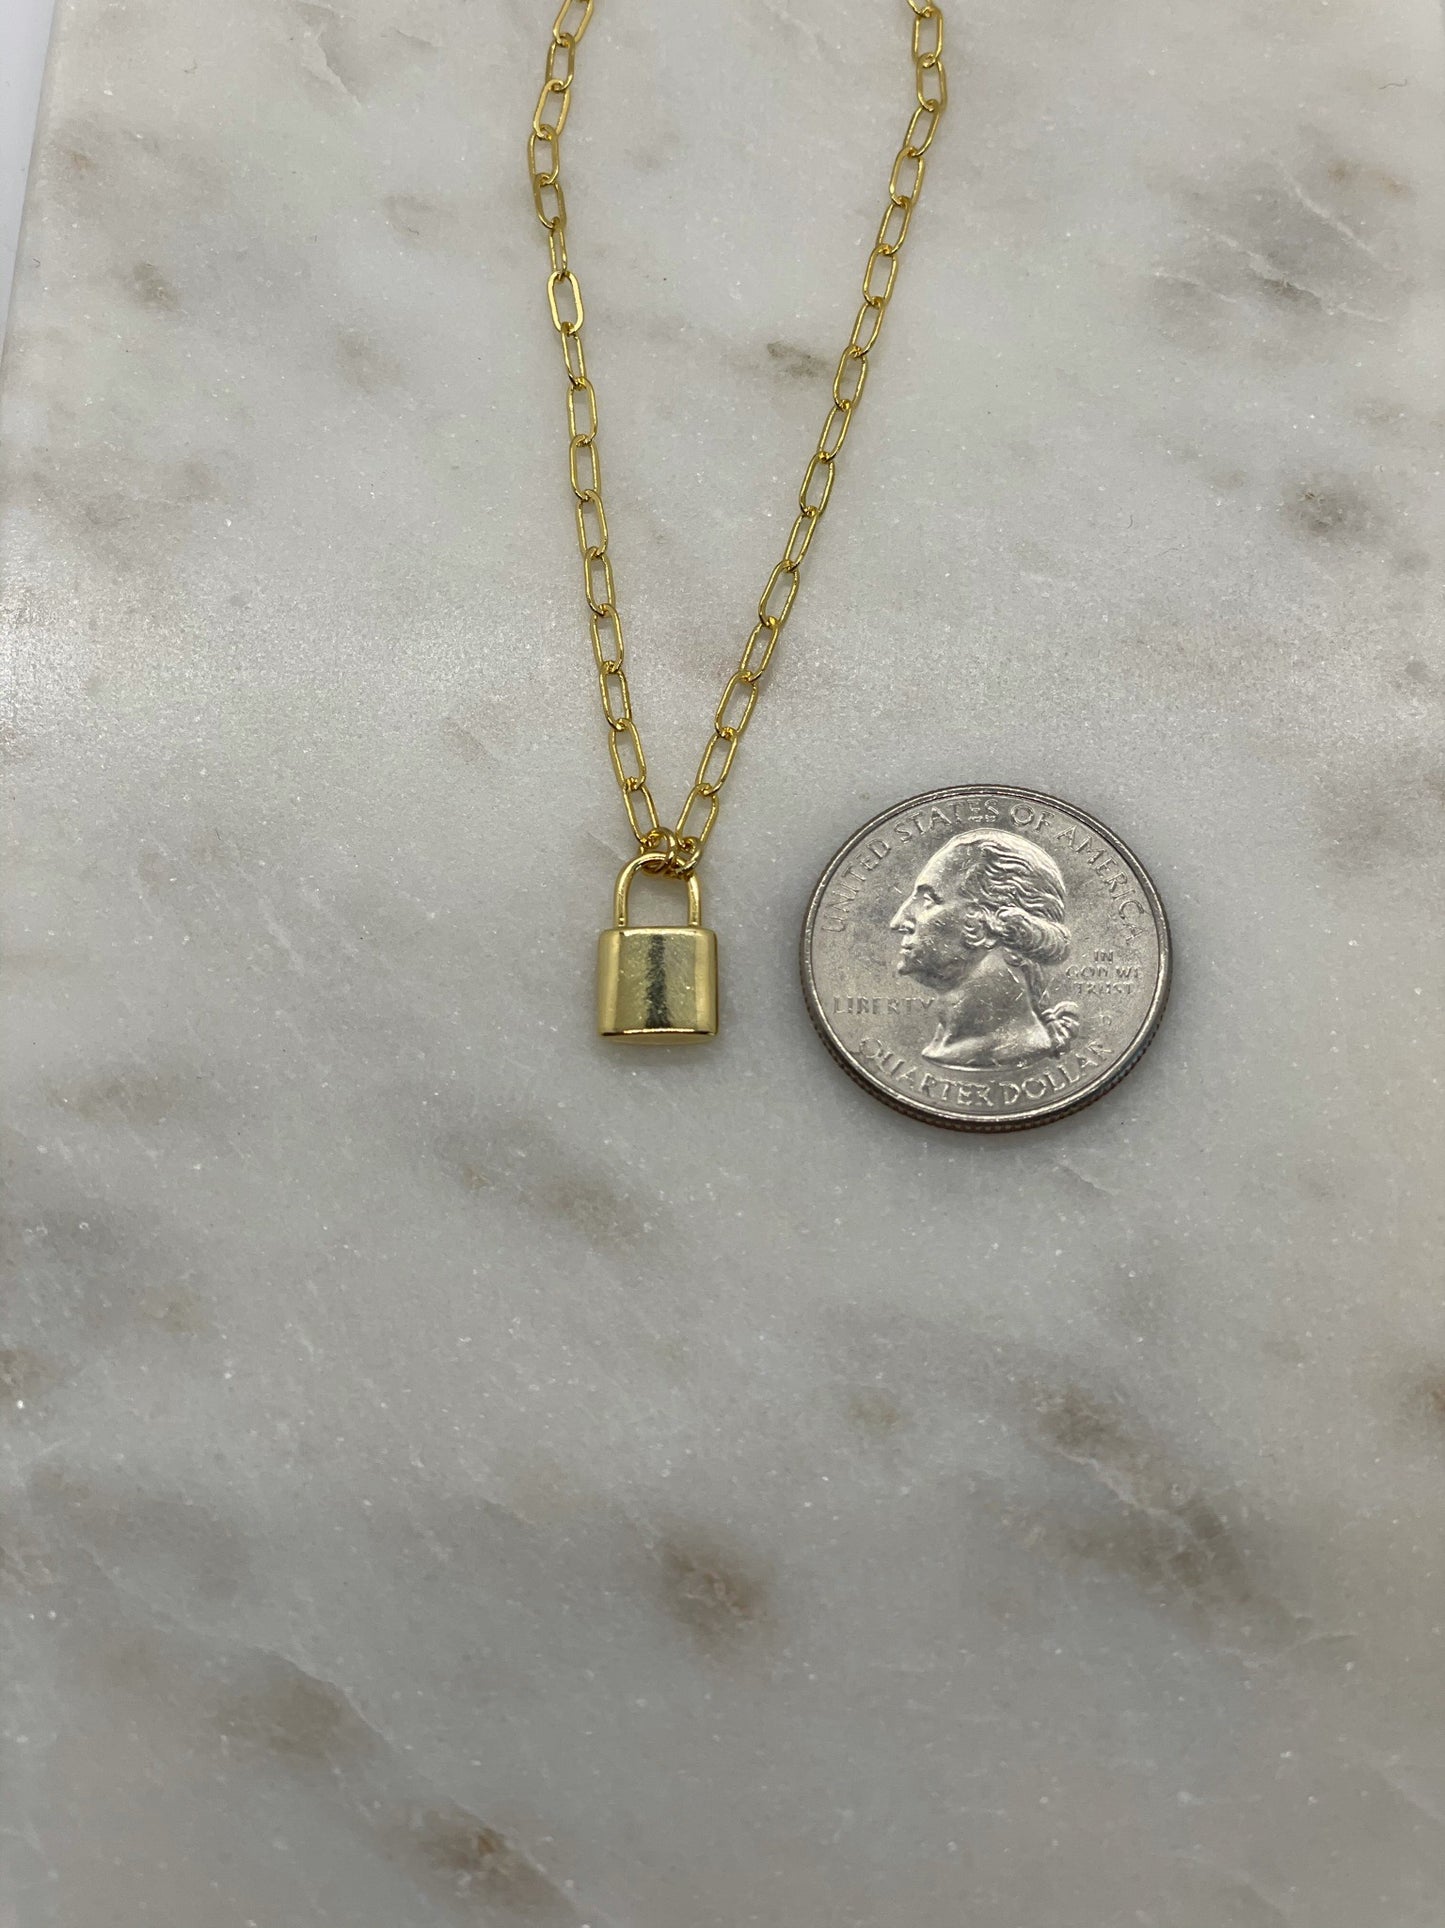 Gold Chain Lock Necklace